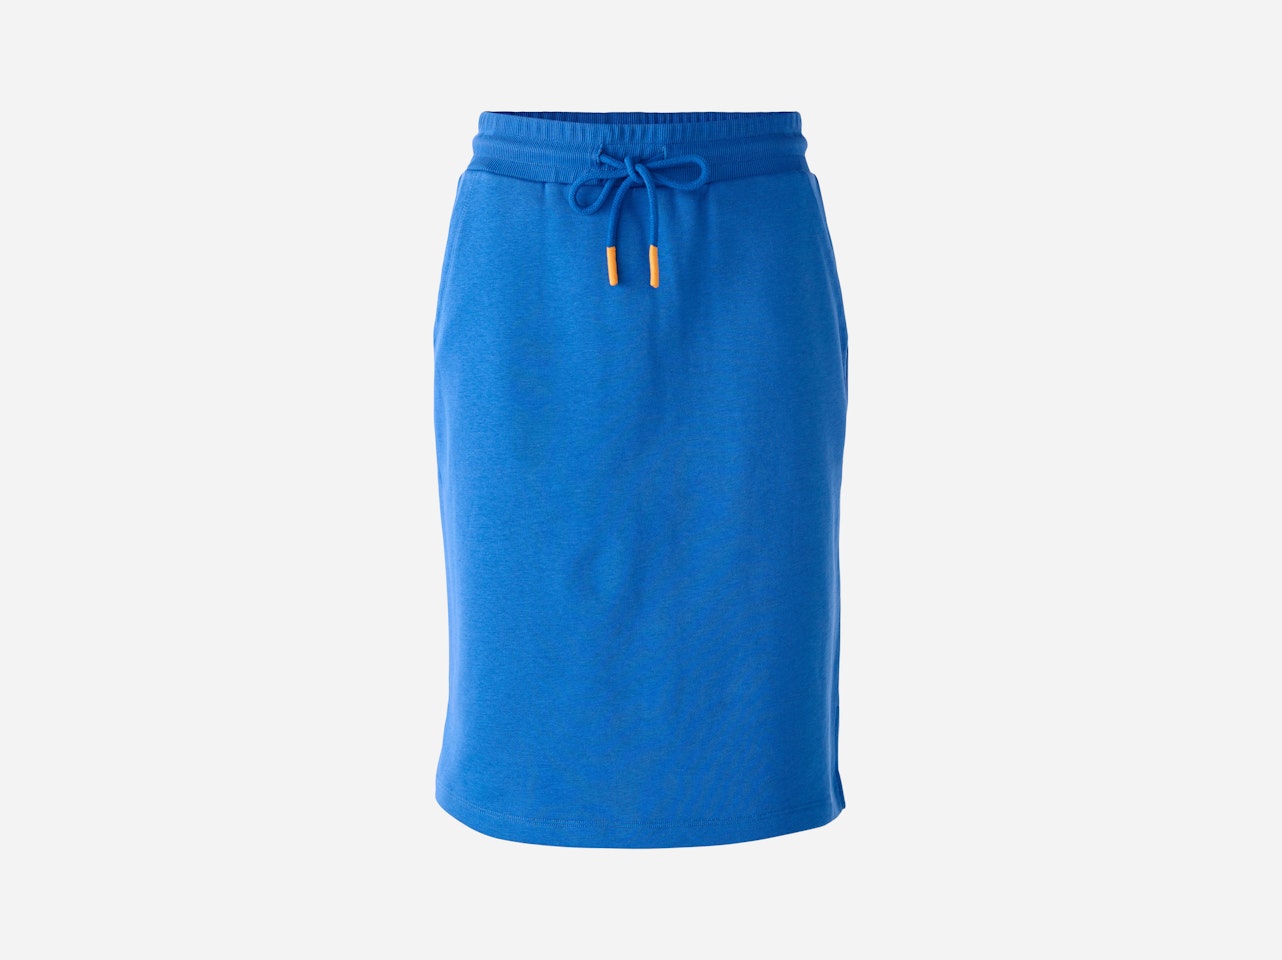 Bild 1 von Sweat skirt with pockets and small slits in blue lolite | Oui